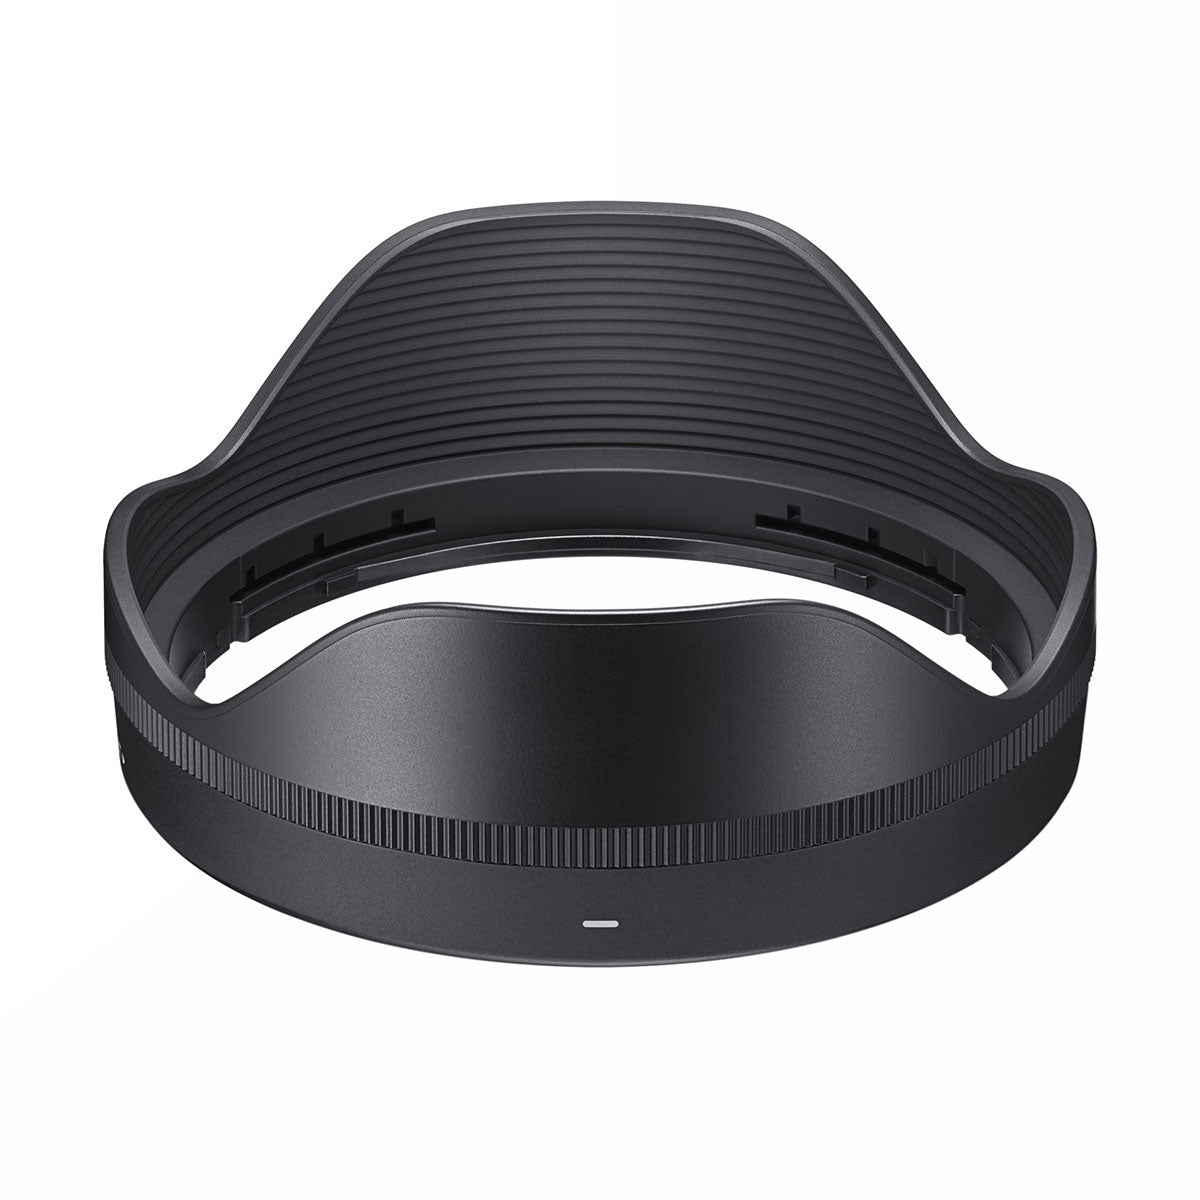 Sigma 16-28mm f/2.8 DG DN Contemporary Lens for Sony FE